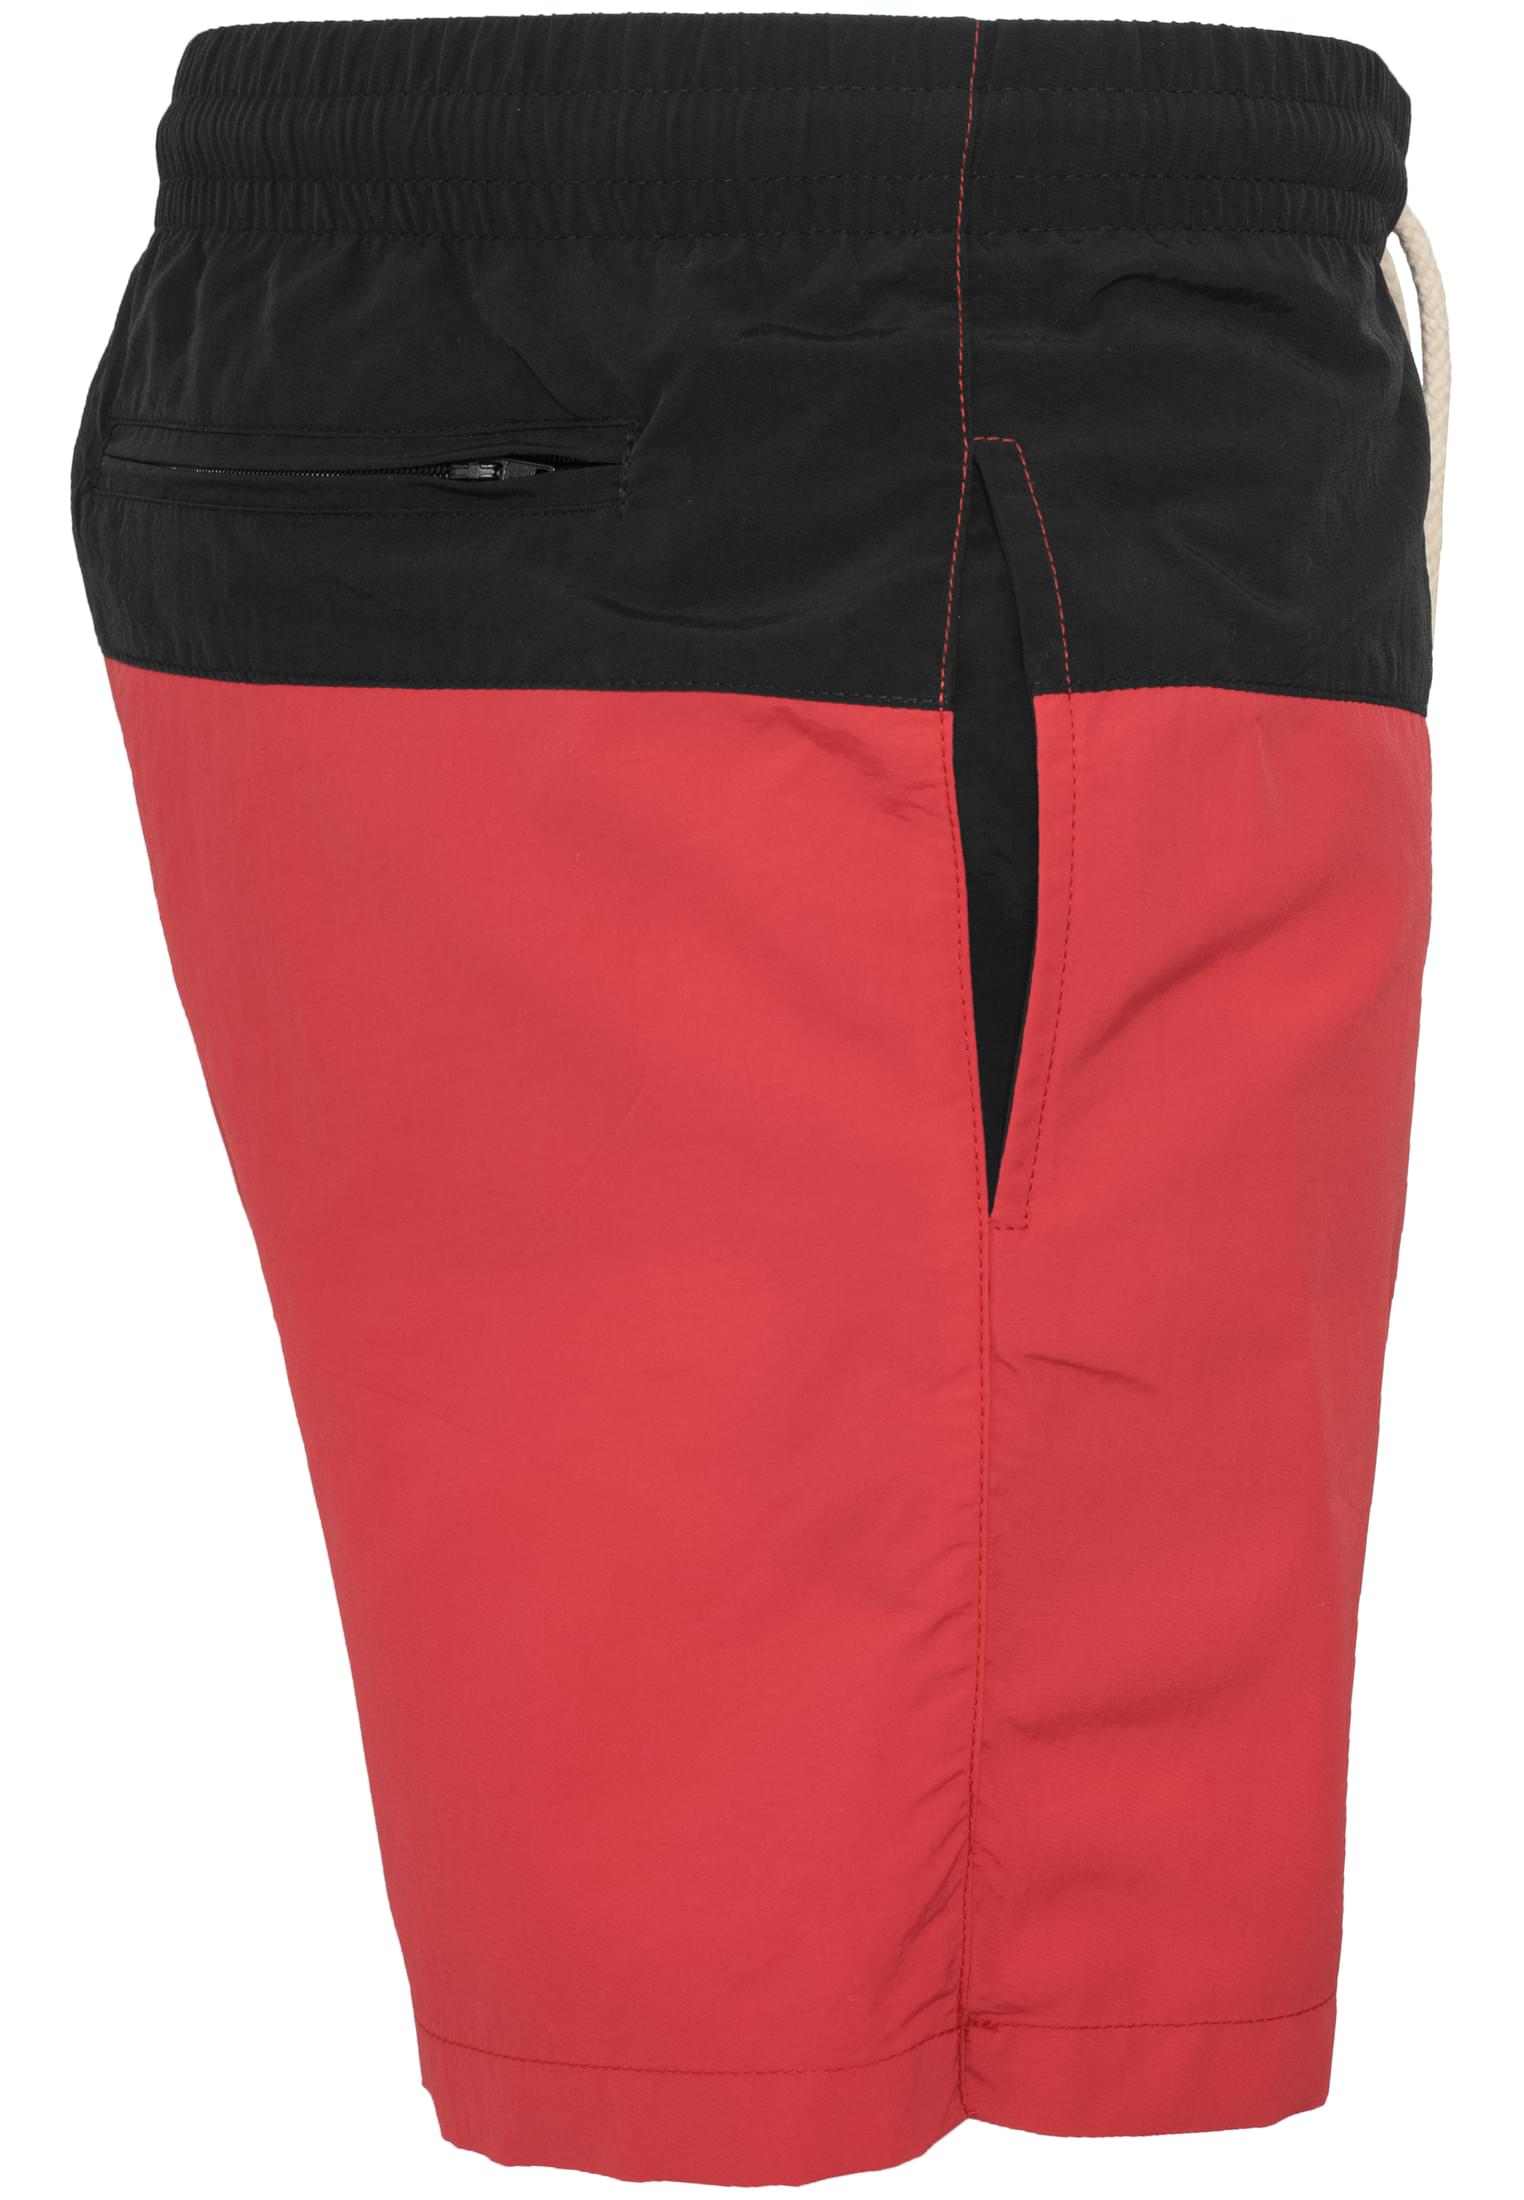 Plus Size Block Swim Shorts in Farbe blk/red